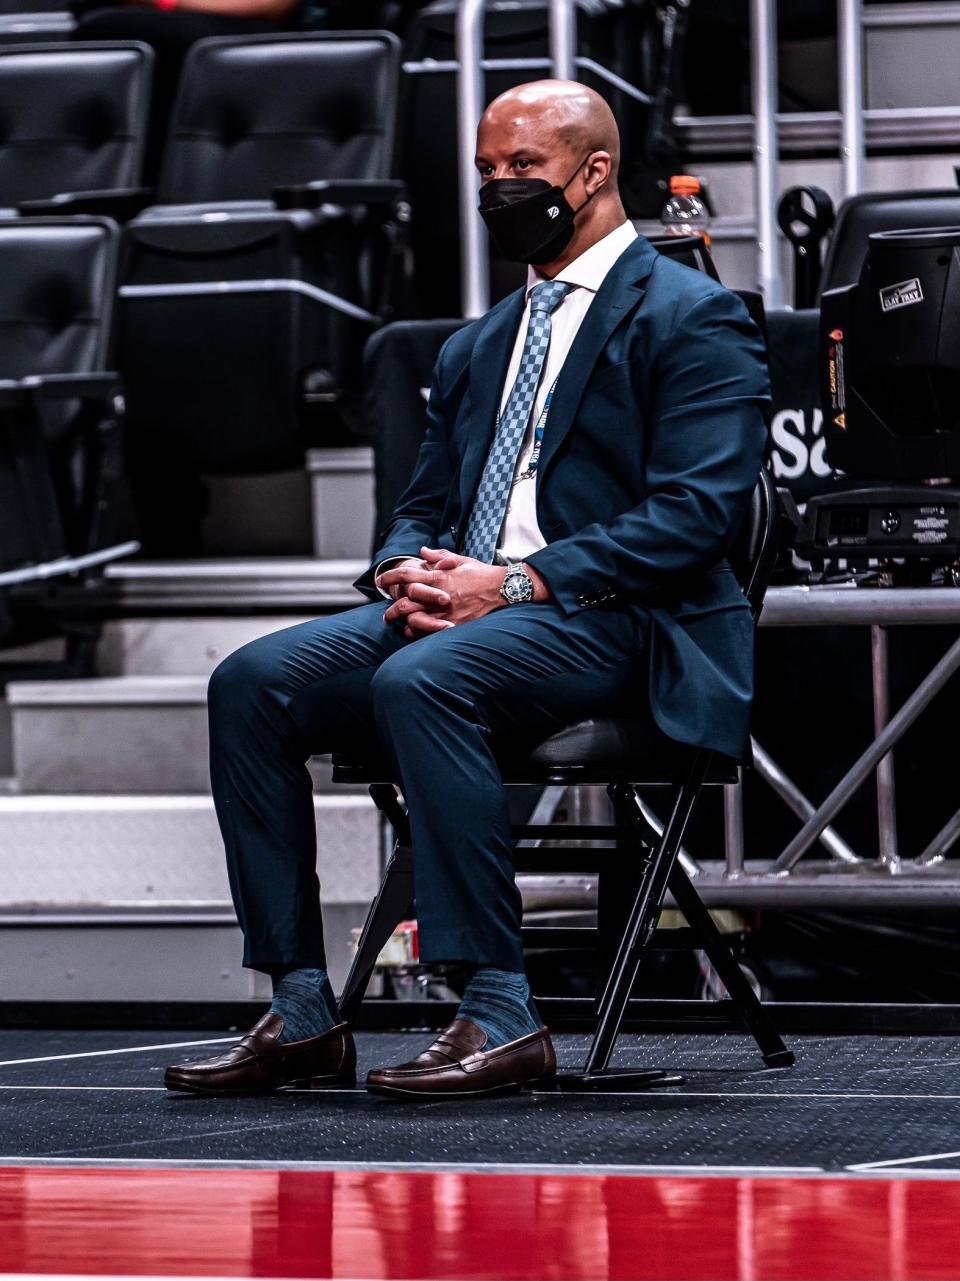 Rob Murphy sits courtside during a 2021 NBA game between the Detroit Pistons and Orlando Magic at Little Caesars Arena.